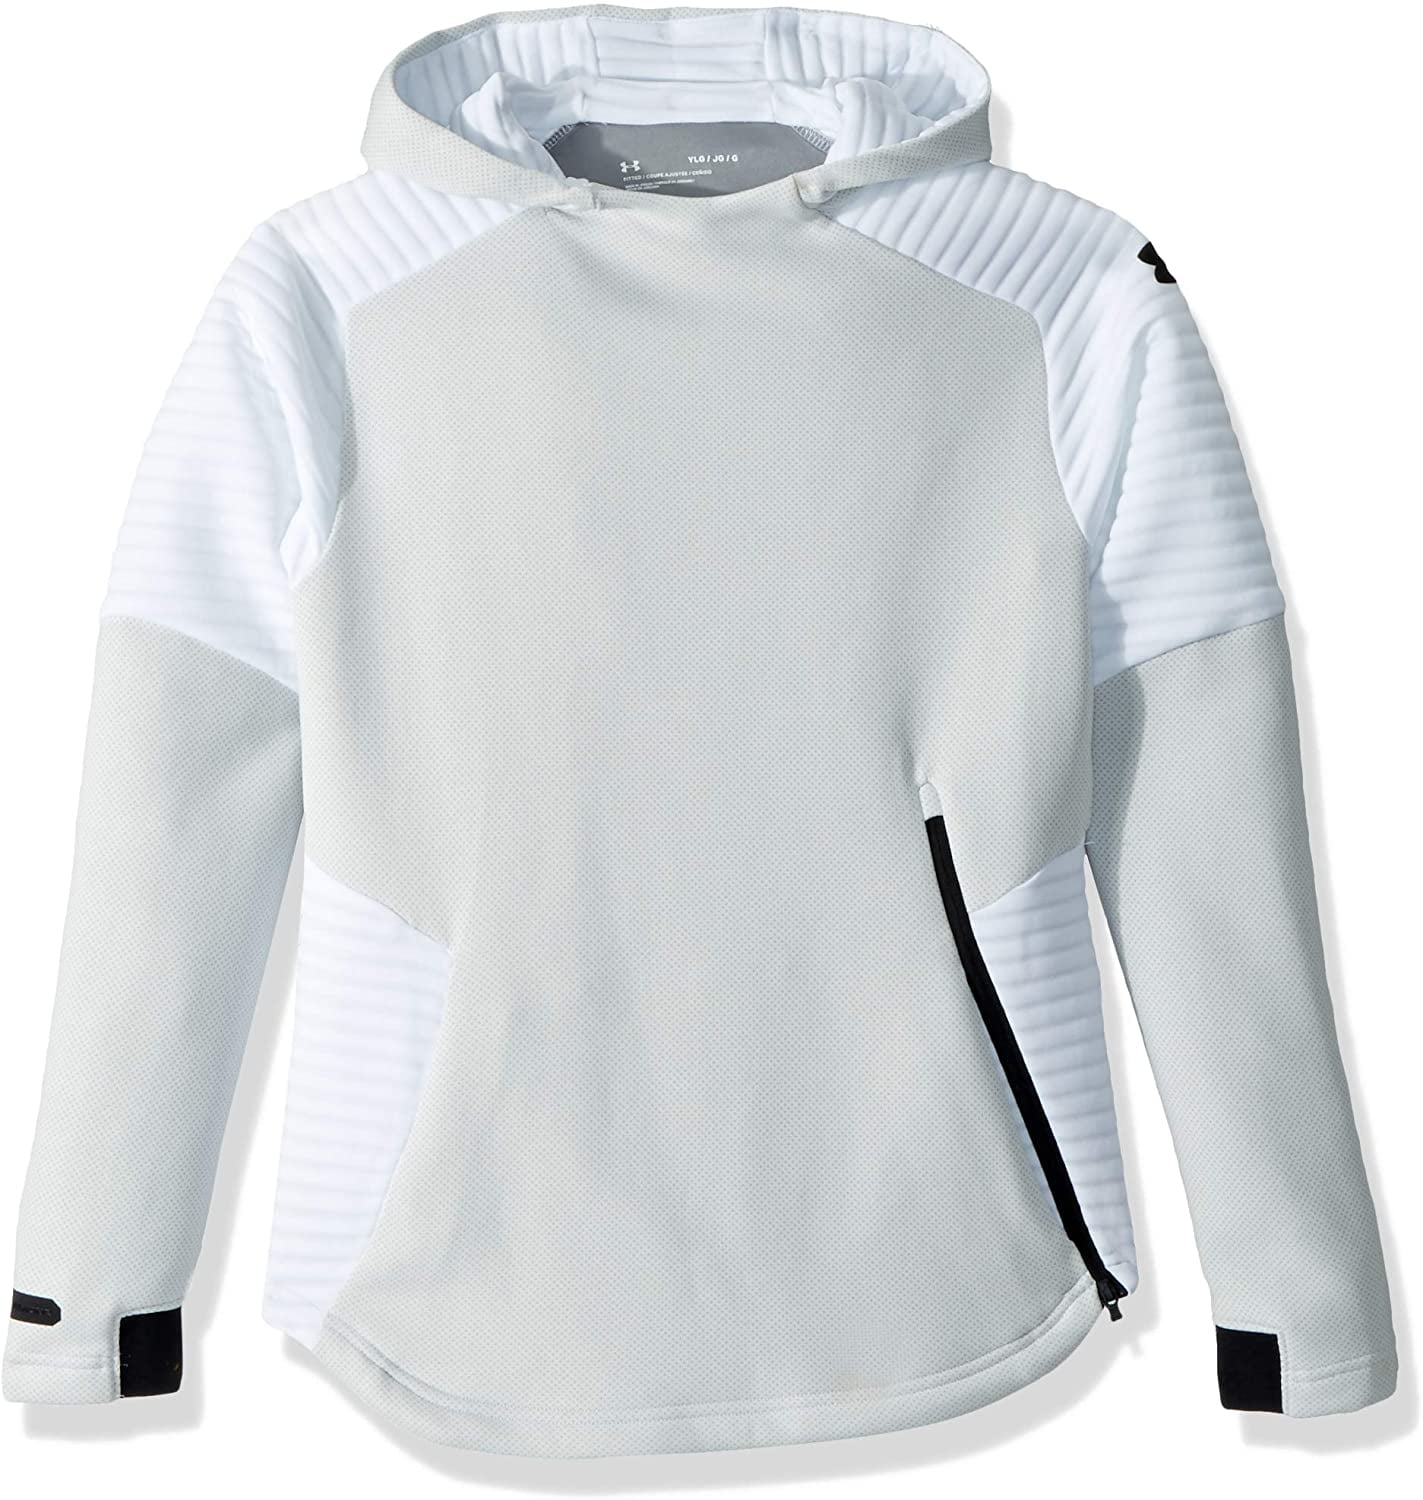 white under armour sweater